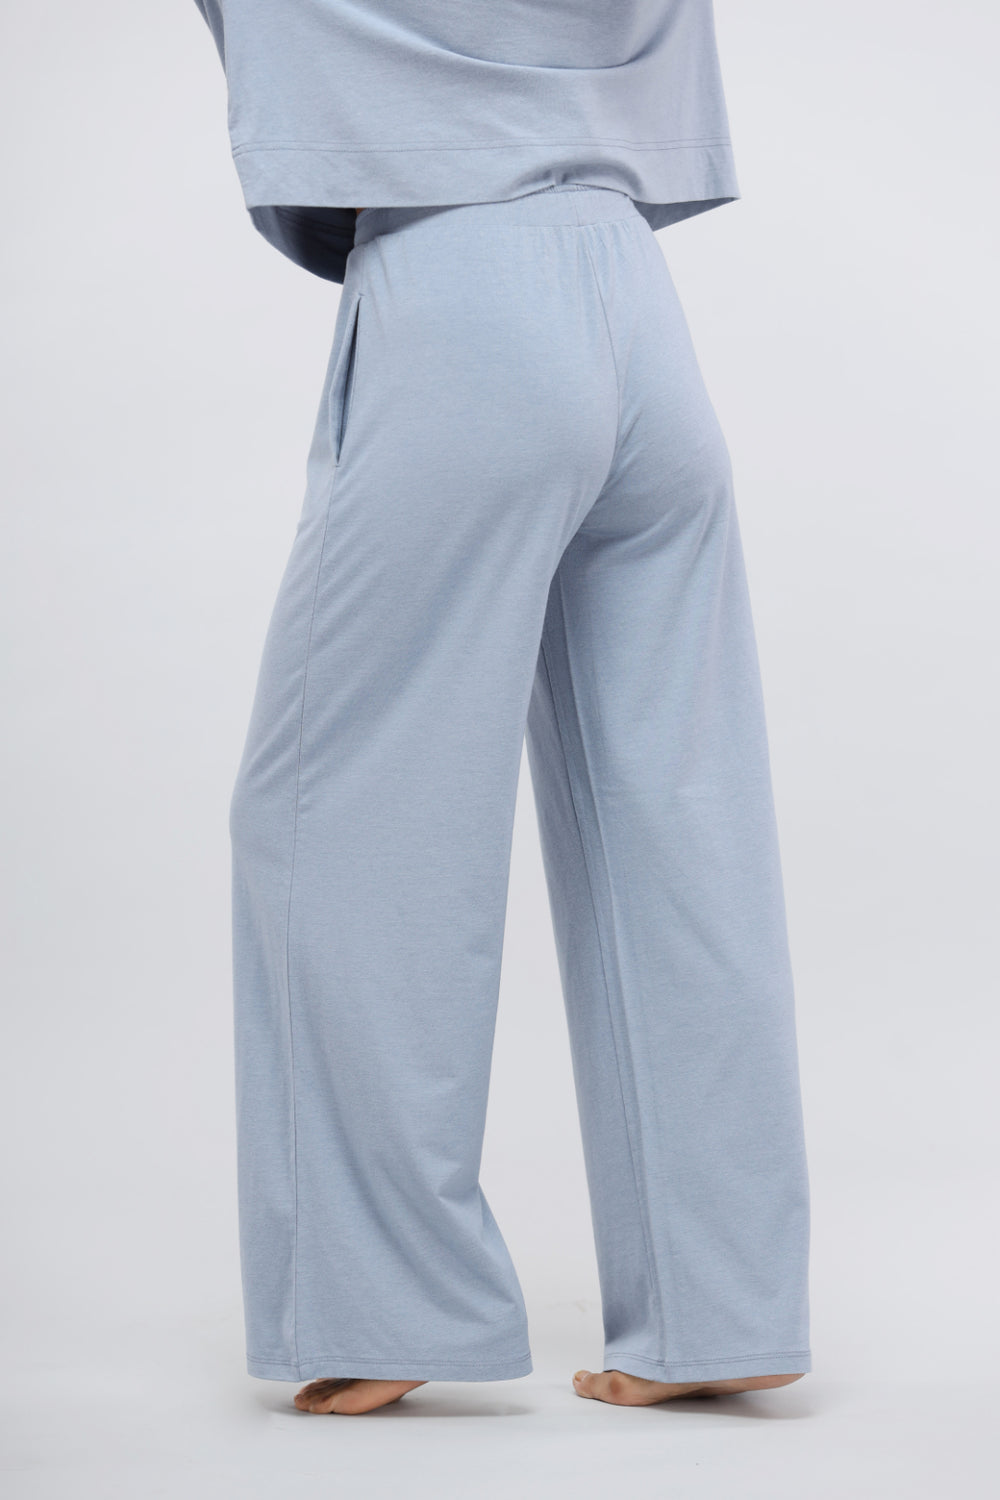 Dusty Blue Luxflo Travel Pant